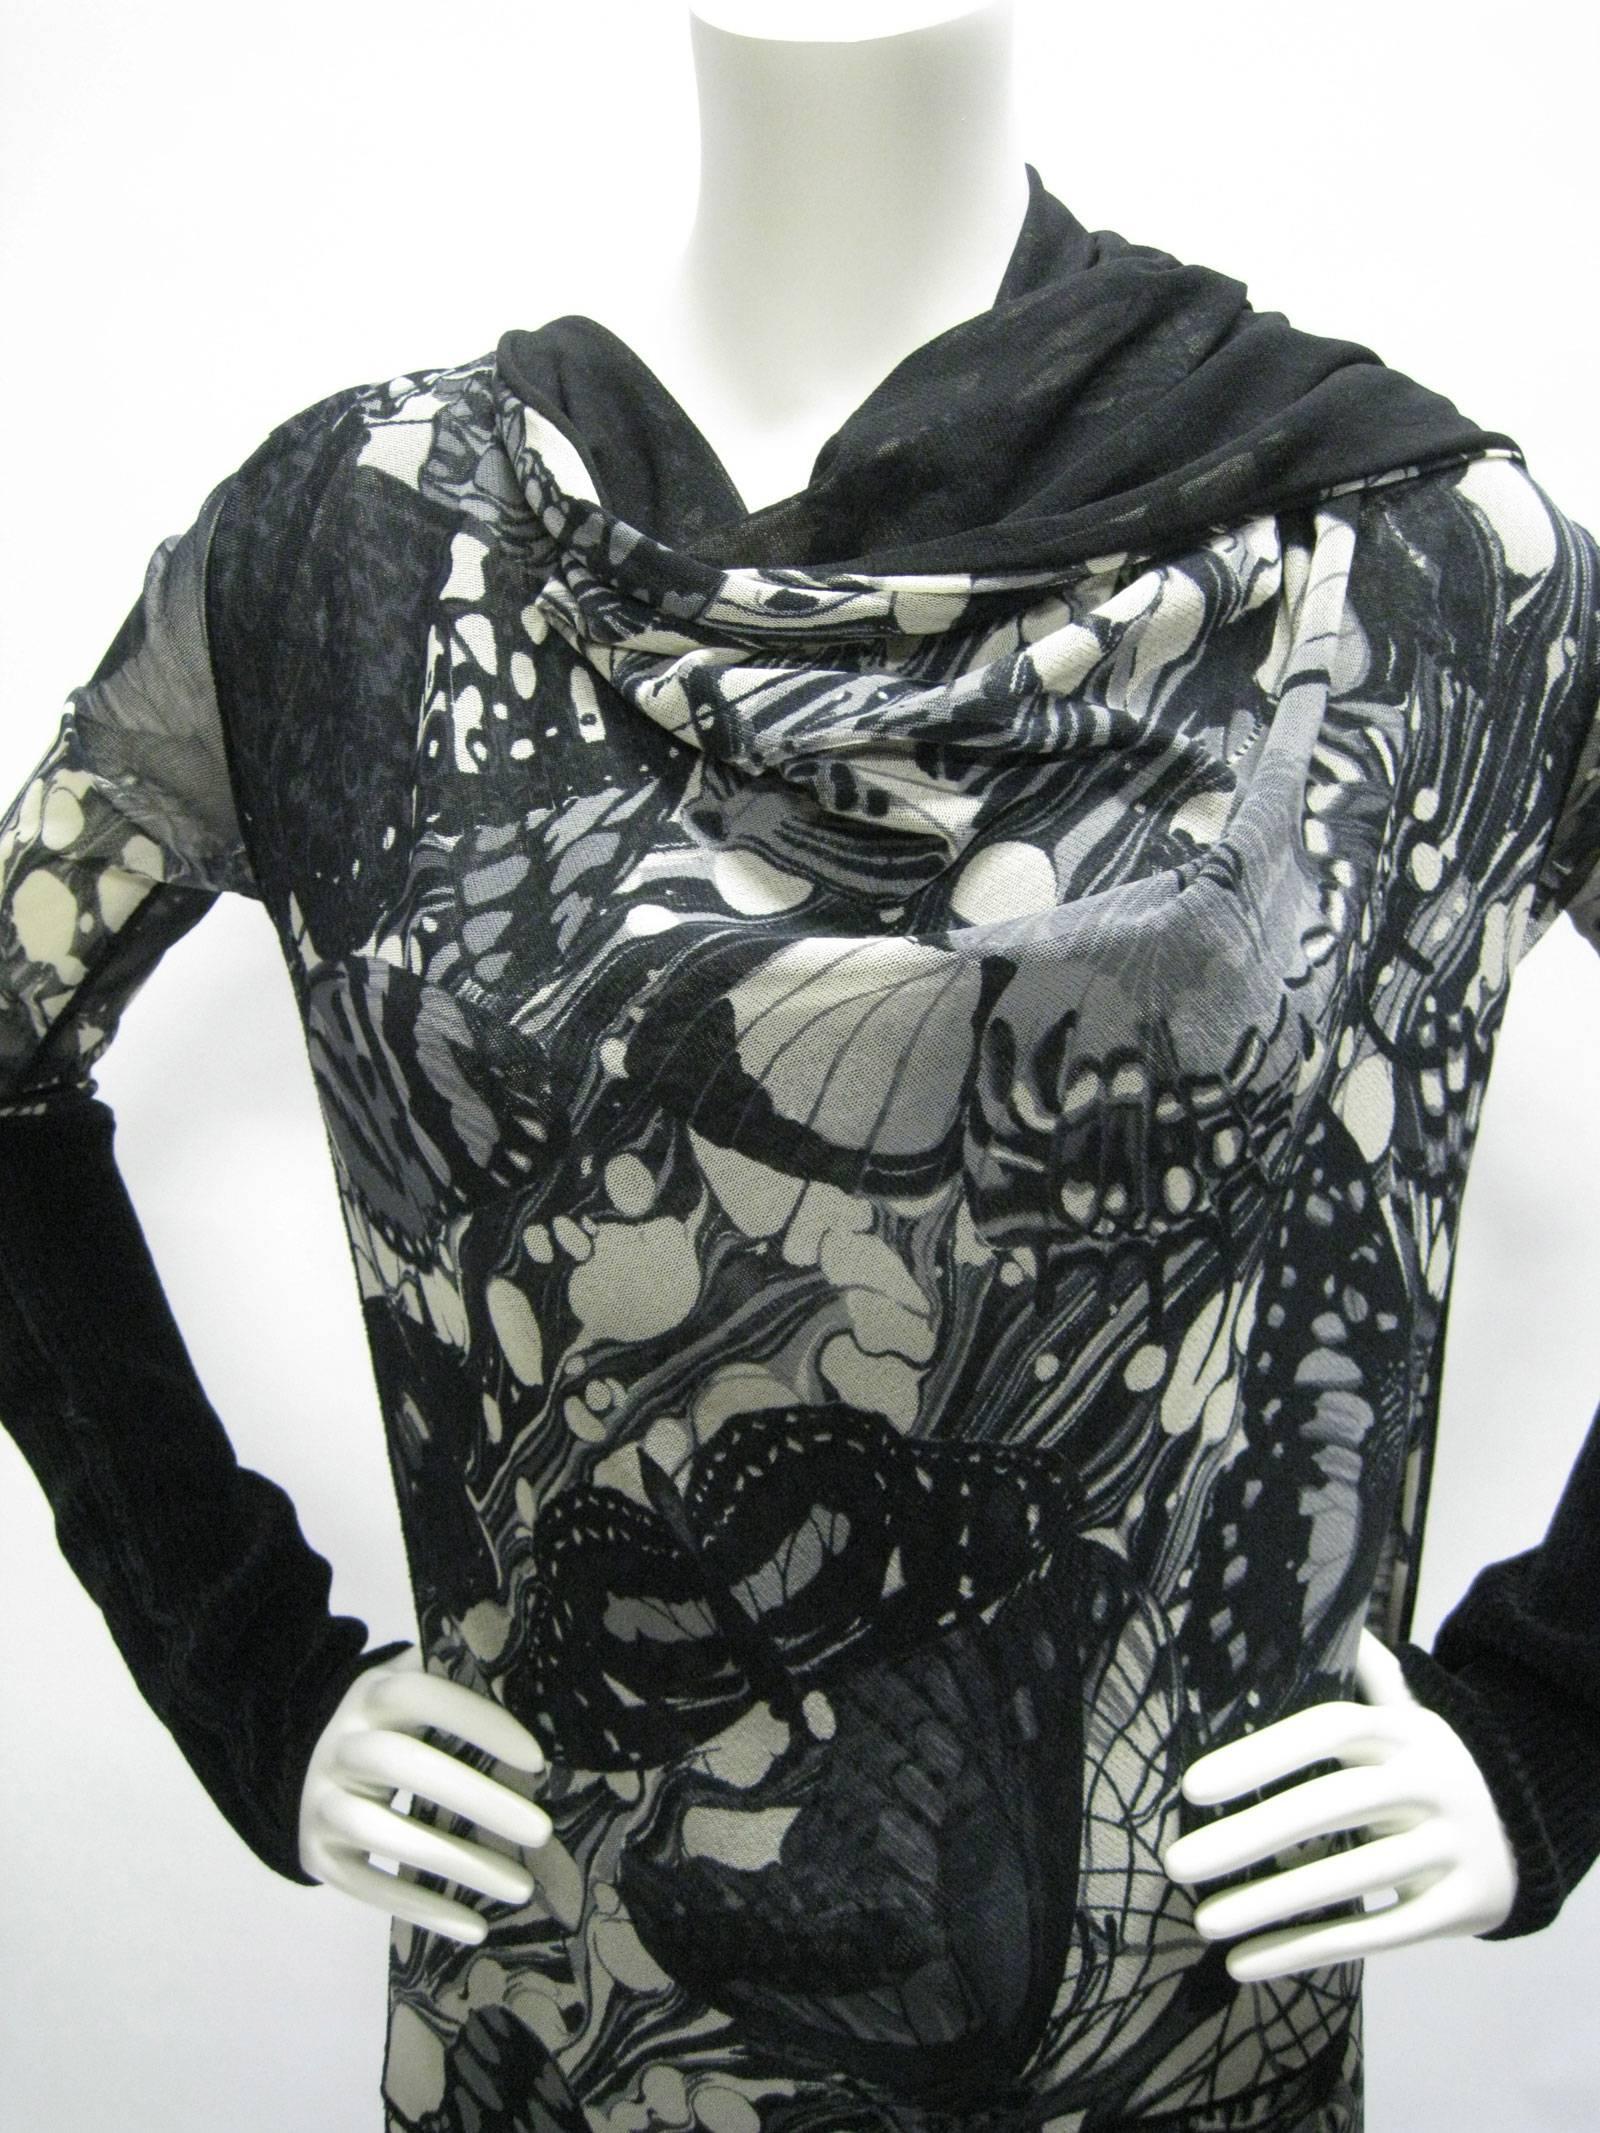 Graphic Jean Paul Gaultier Maille Femme dress.
Bold black and shades of gray abstract butterfly print.
Super stretchy double layer mesh.
Long scarf can be worn around neck or loose on back.
Asymmetrical hem with kick pleat tail.
Asymmetrical